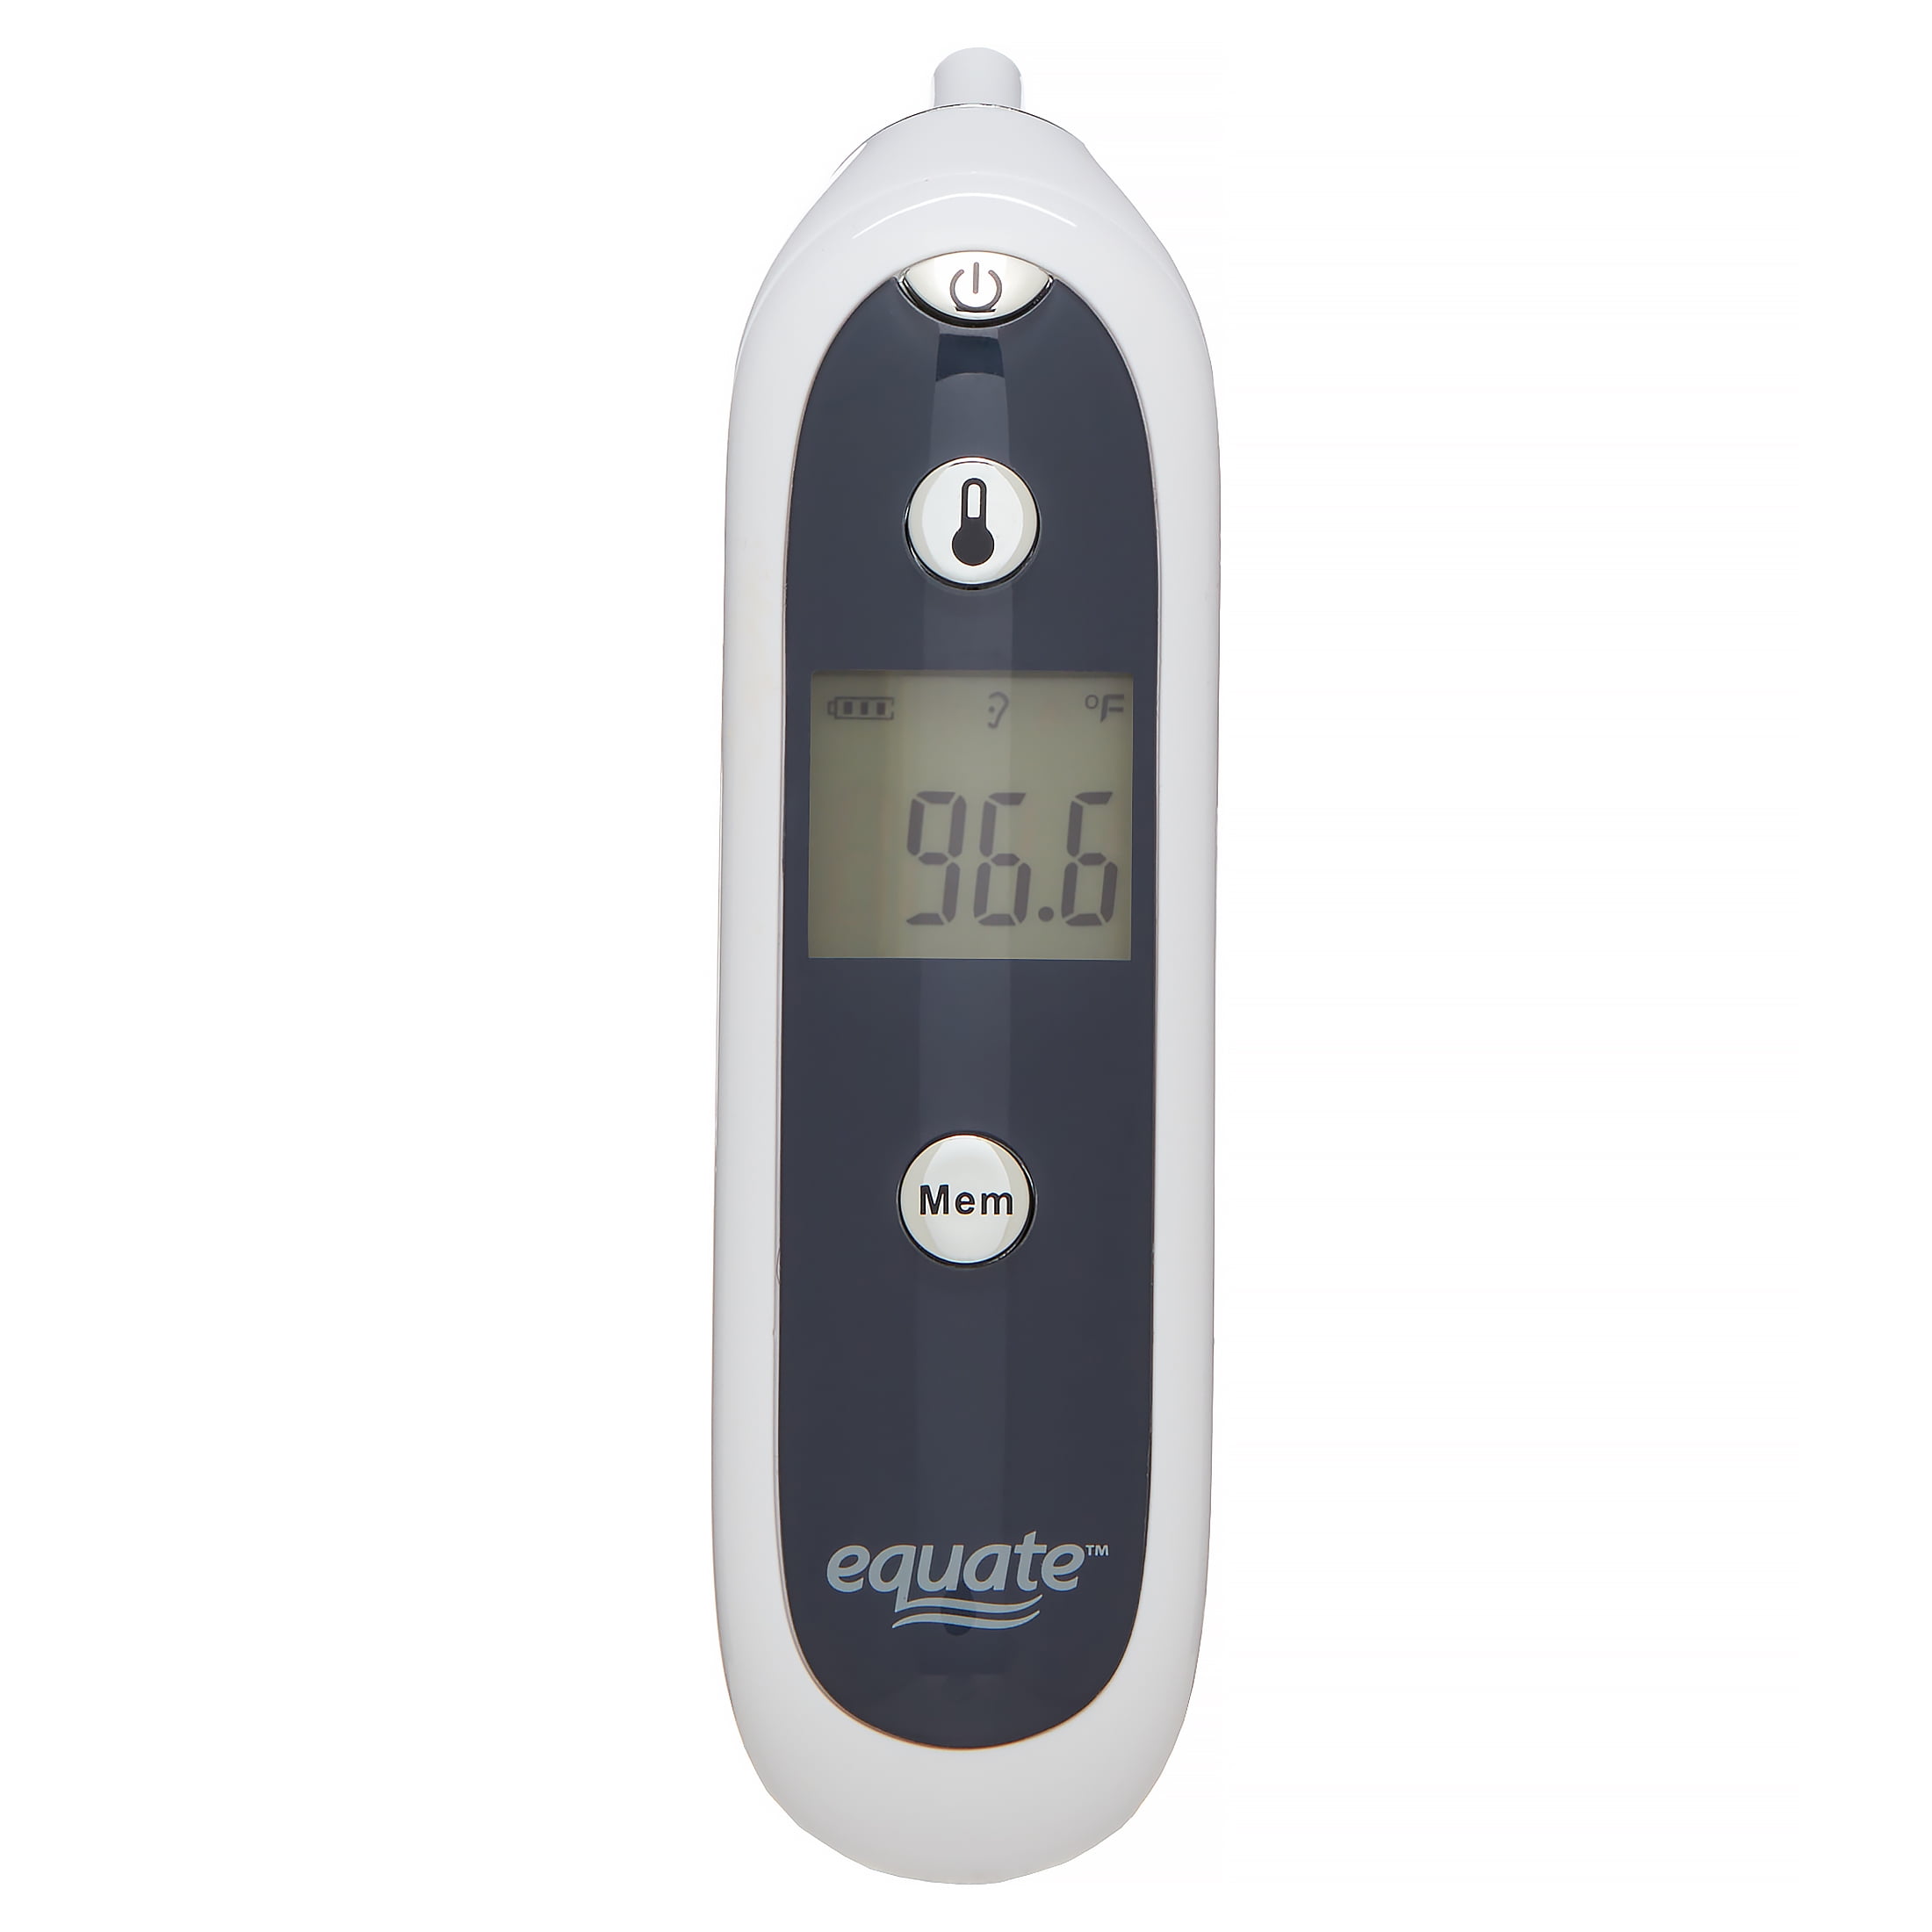 Equate Non Contact Infrared 1-Second Digital Body Thermometer